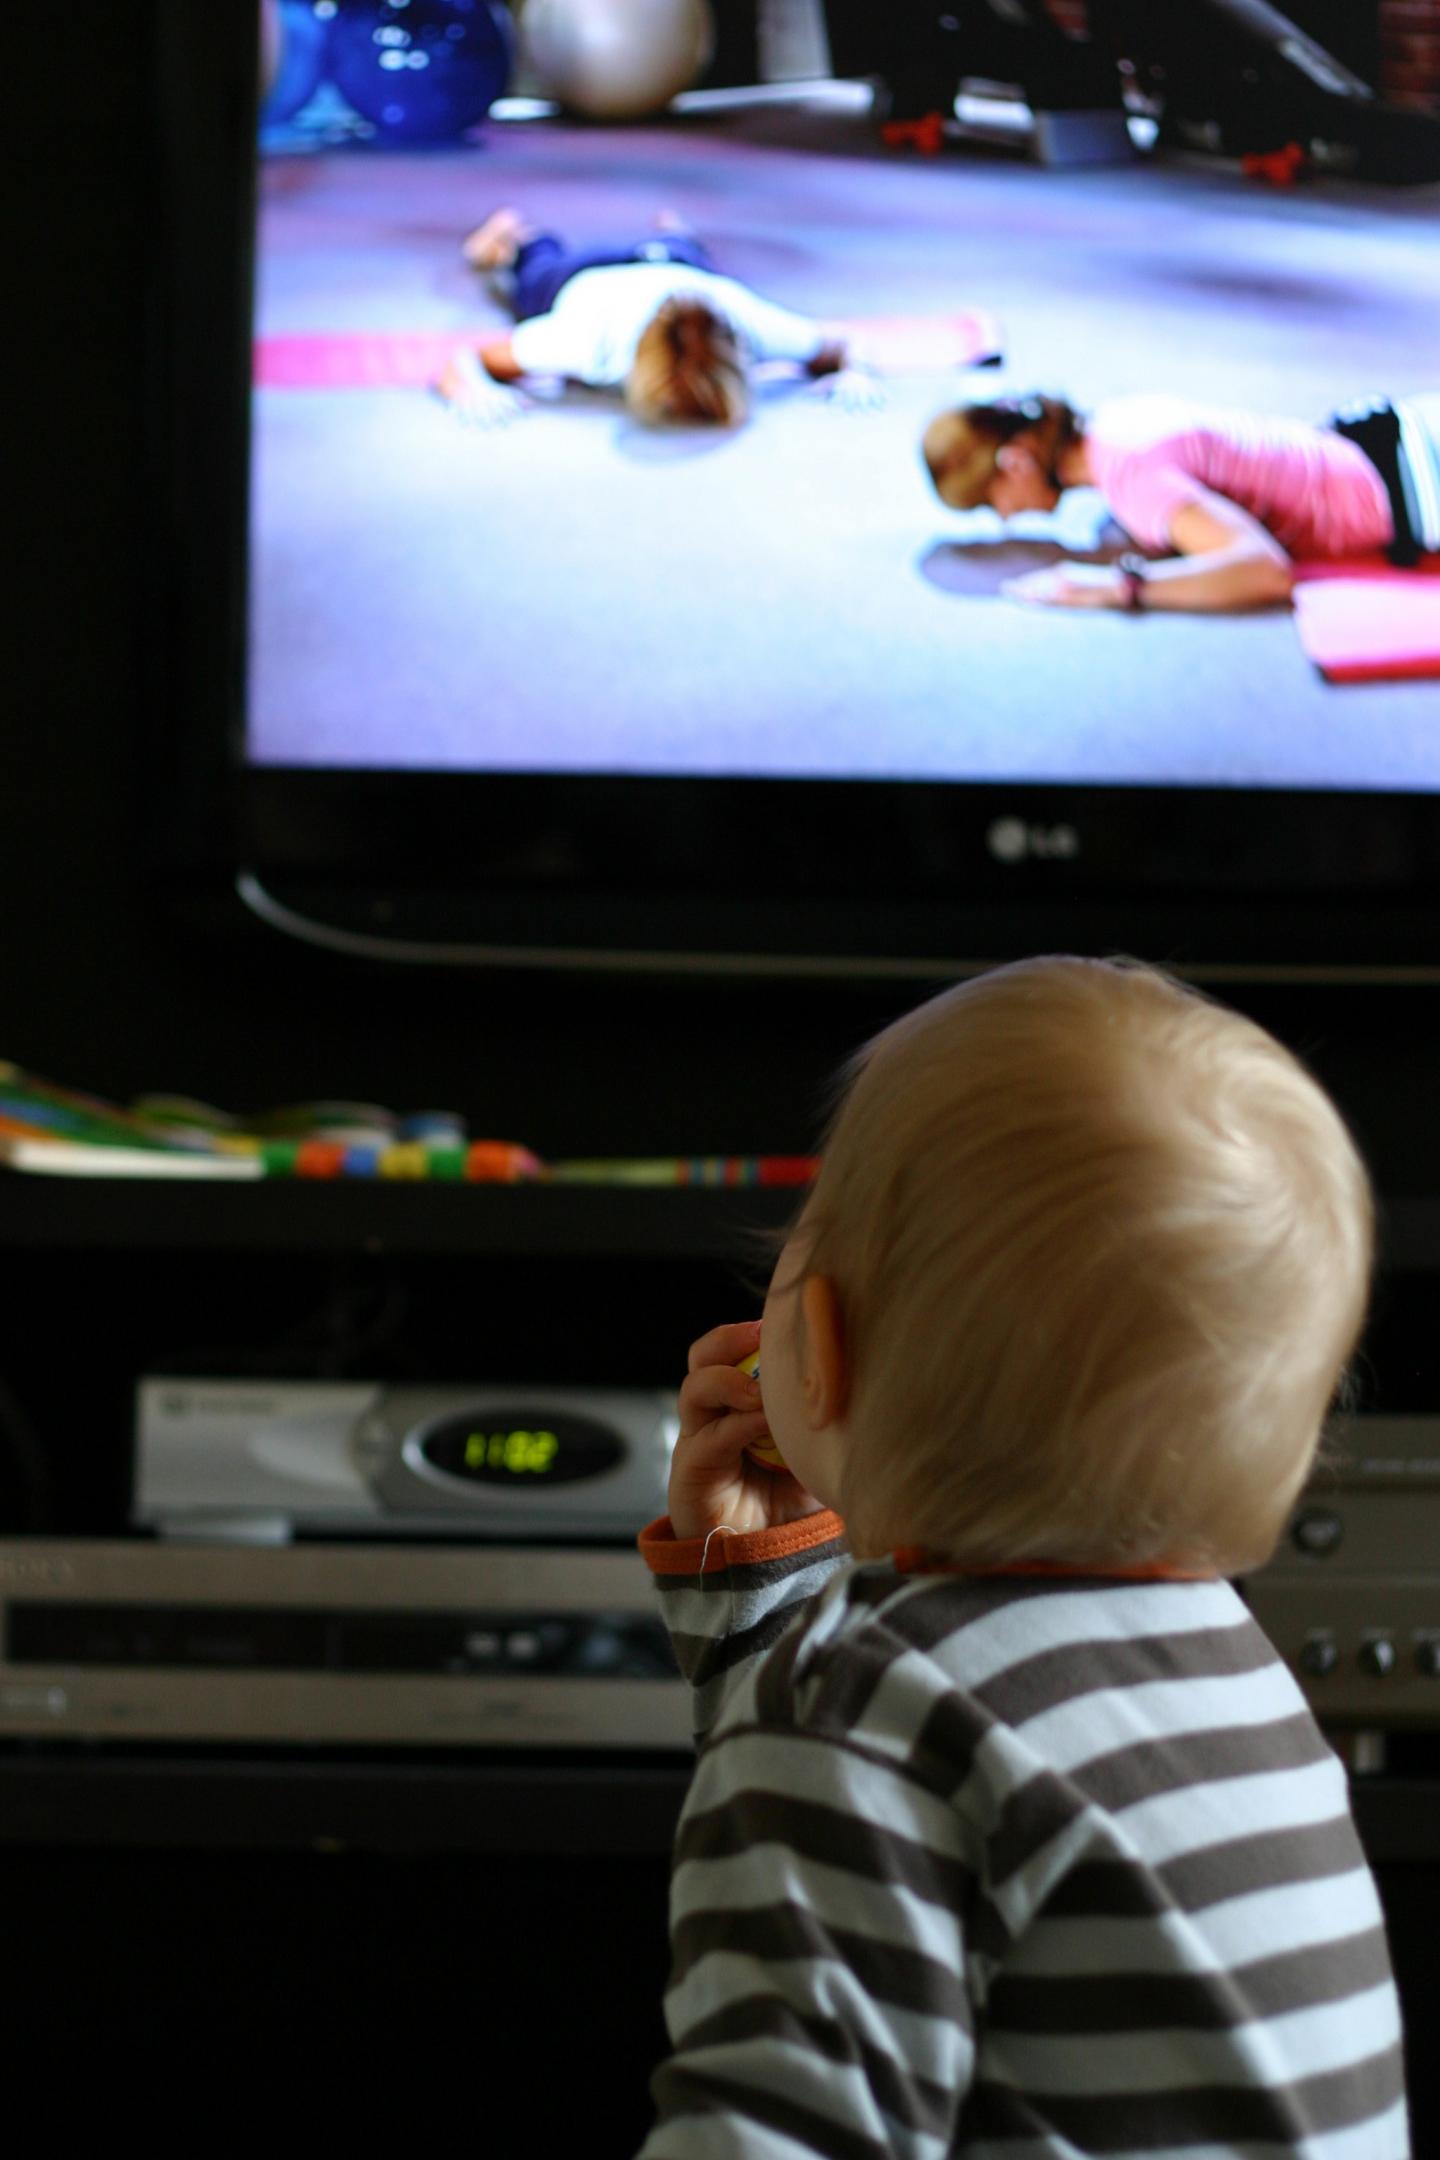 Toddlers Who Chill in Front of TV Are at Later Risk of Being Victimized by Classmates